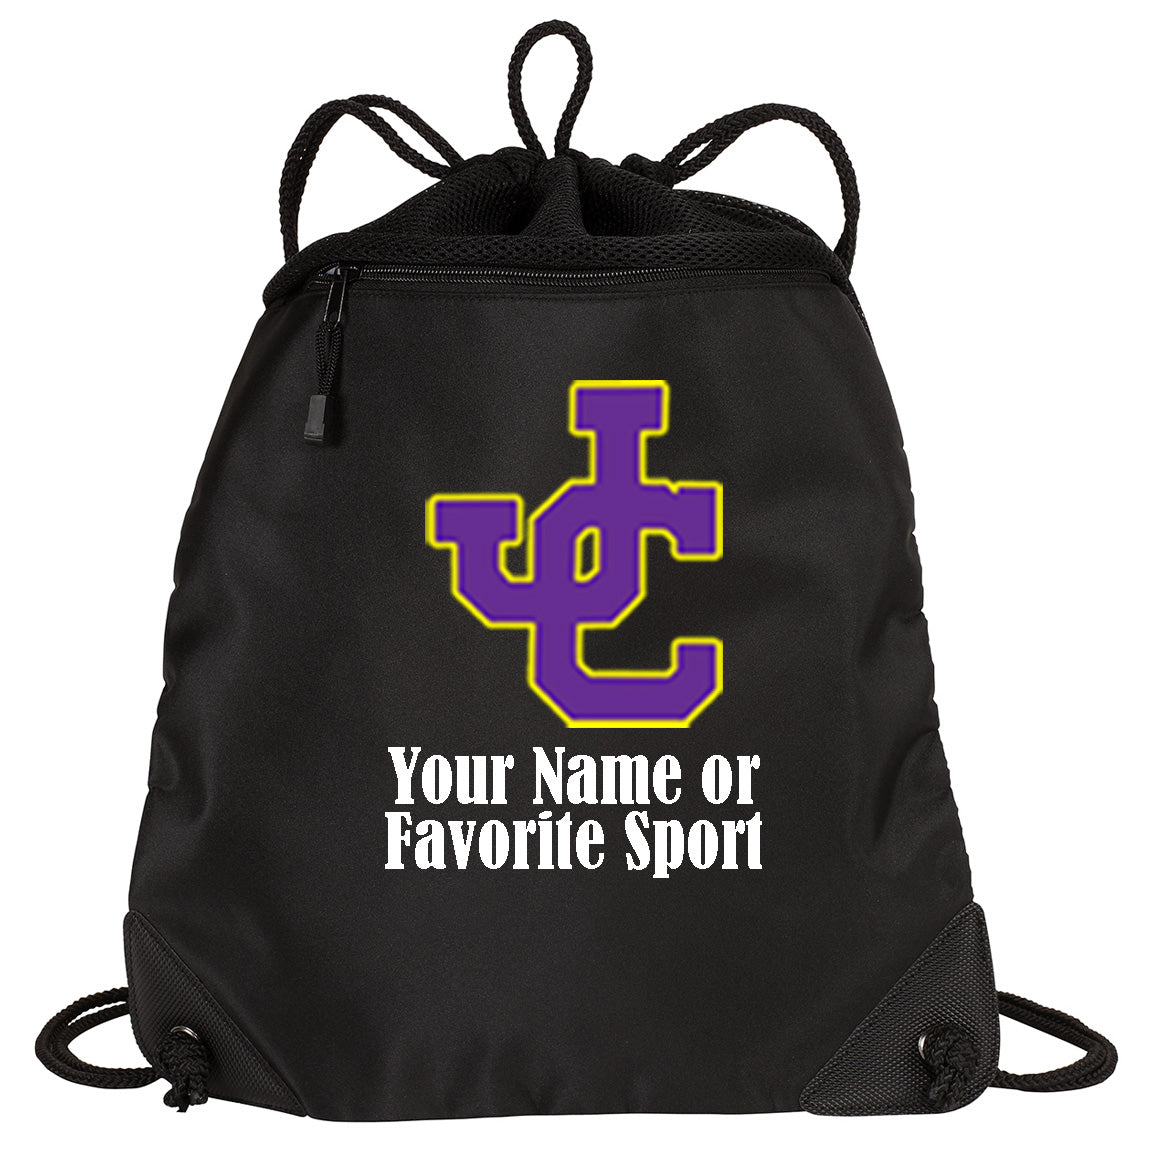 Jones County - Cinch Pack with Mesh Trim with Your Name or Favorite Sport - Black (BG810) - Southern Grace Creations